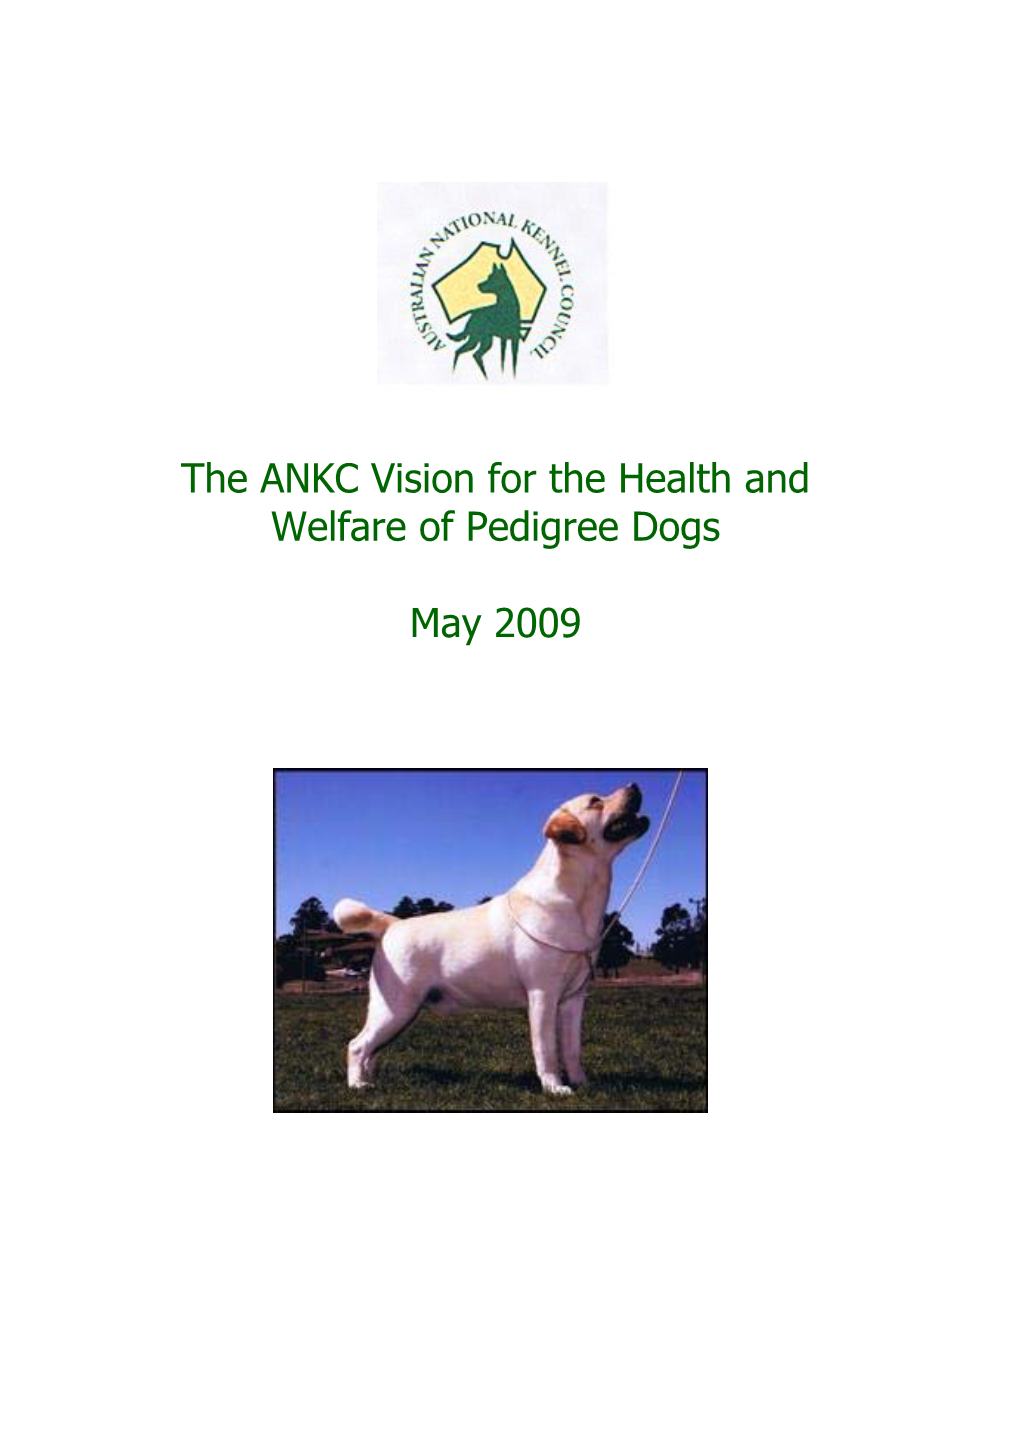 The ANKC Vision for the Health and Welfare of Pedigree Dogs May 2009